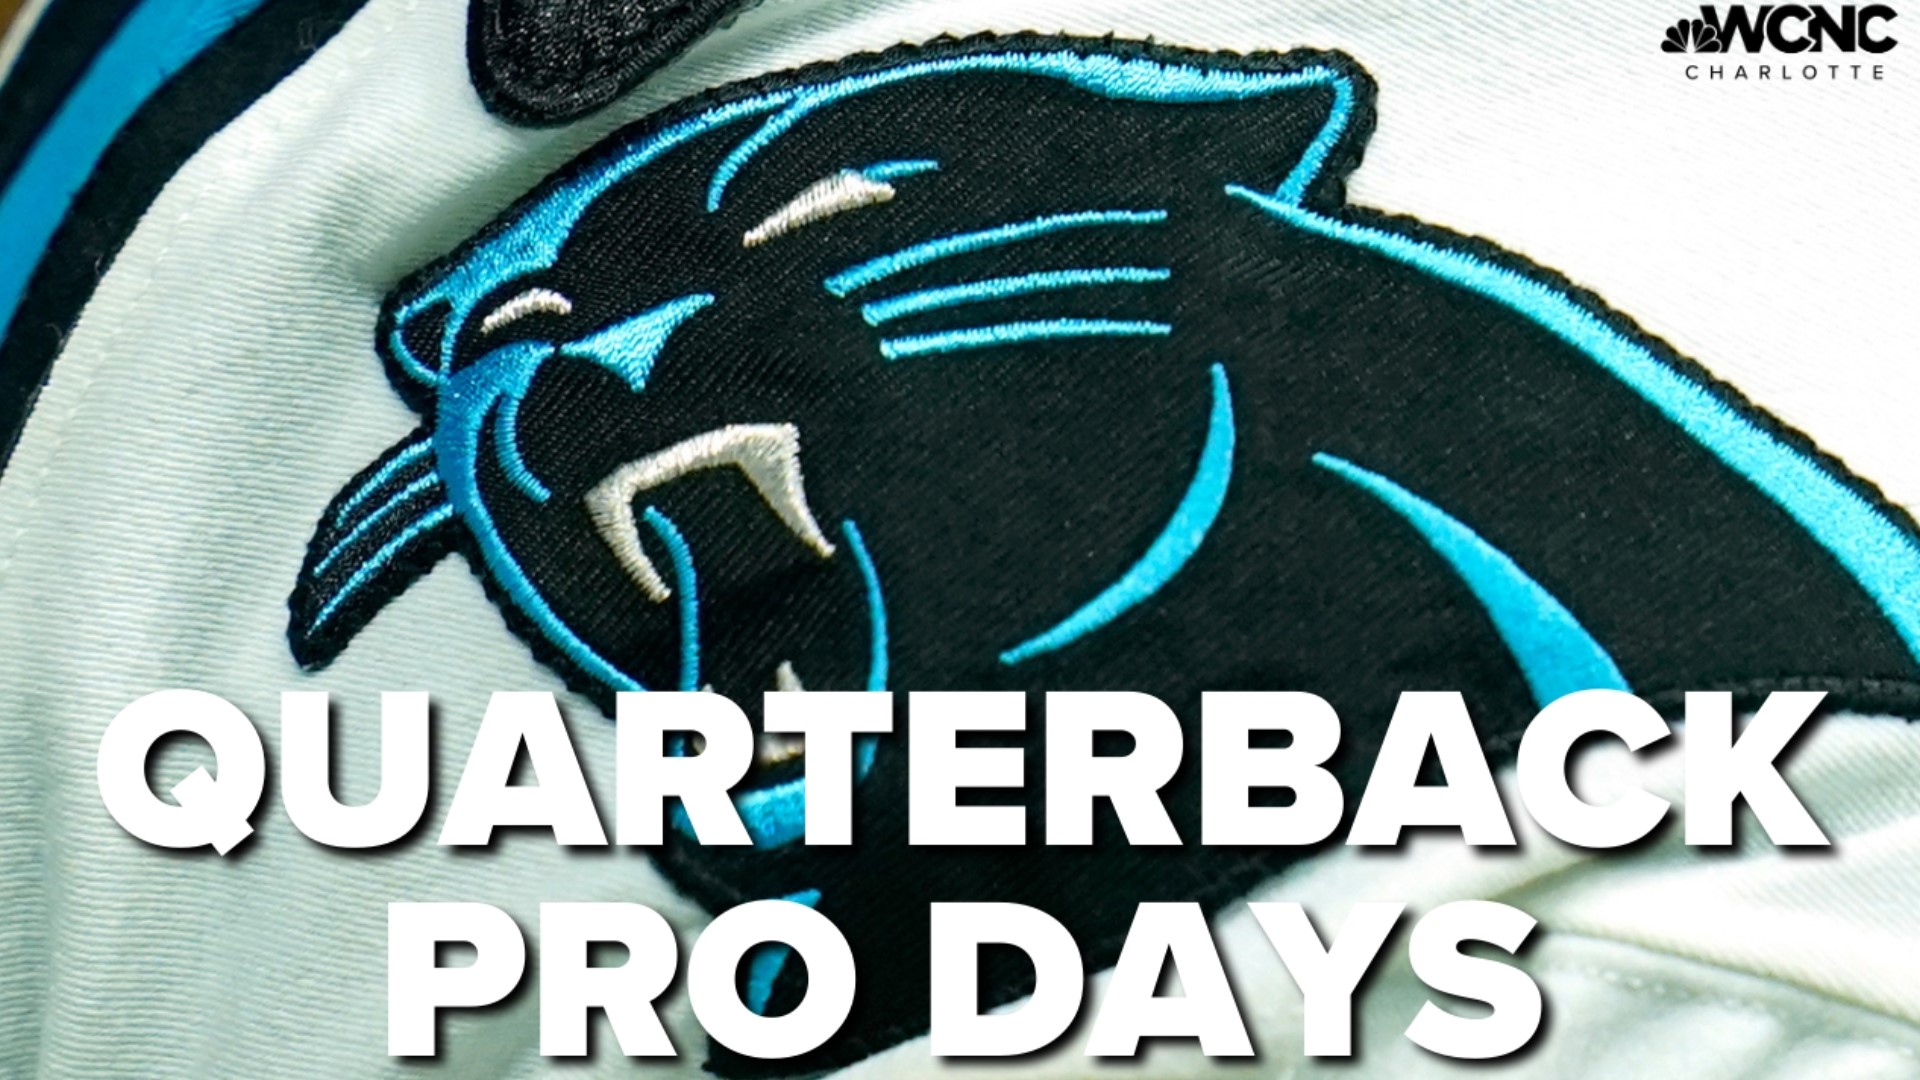 The WCNC Charlotte sports team discusses the Panthers' large Pro Day contingent for C.J. Stroud.